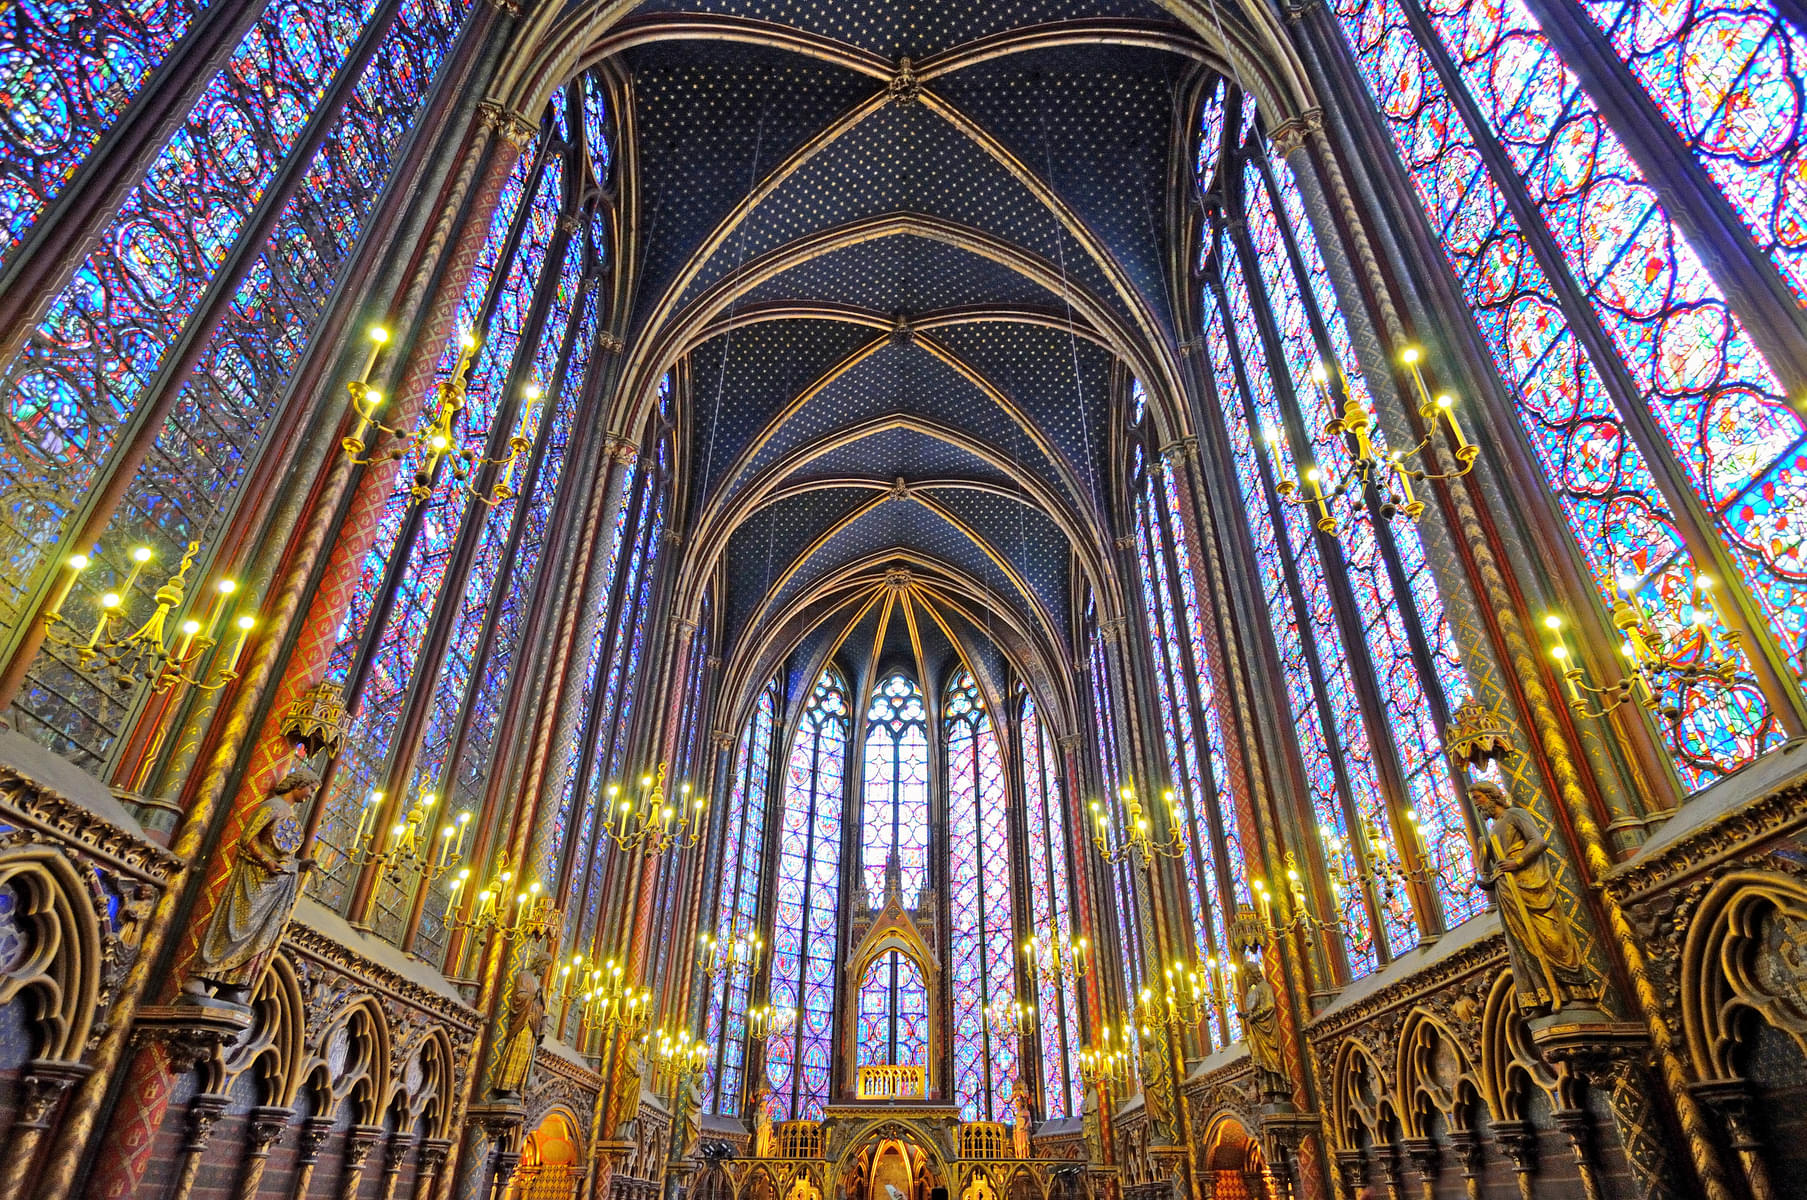 Get astonished by the iconic stained glass windows of the chapel